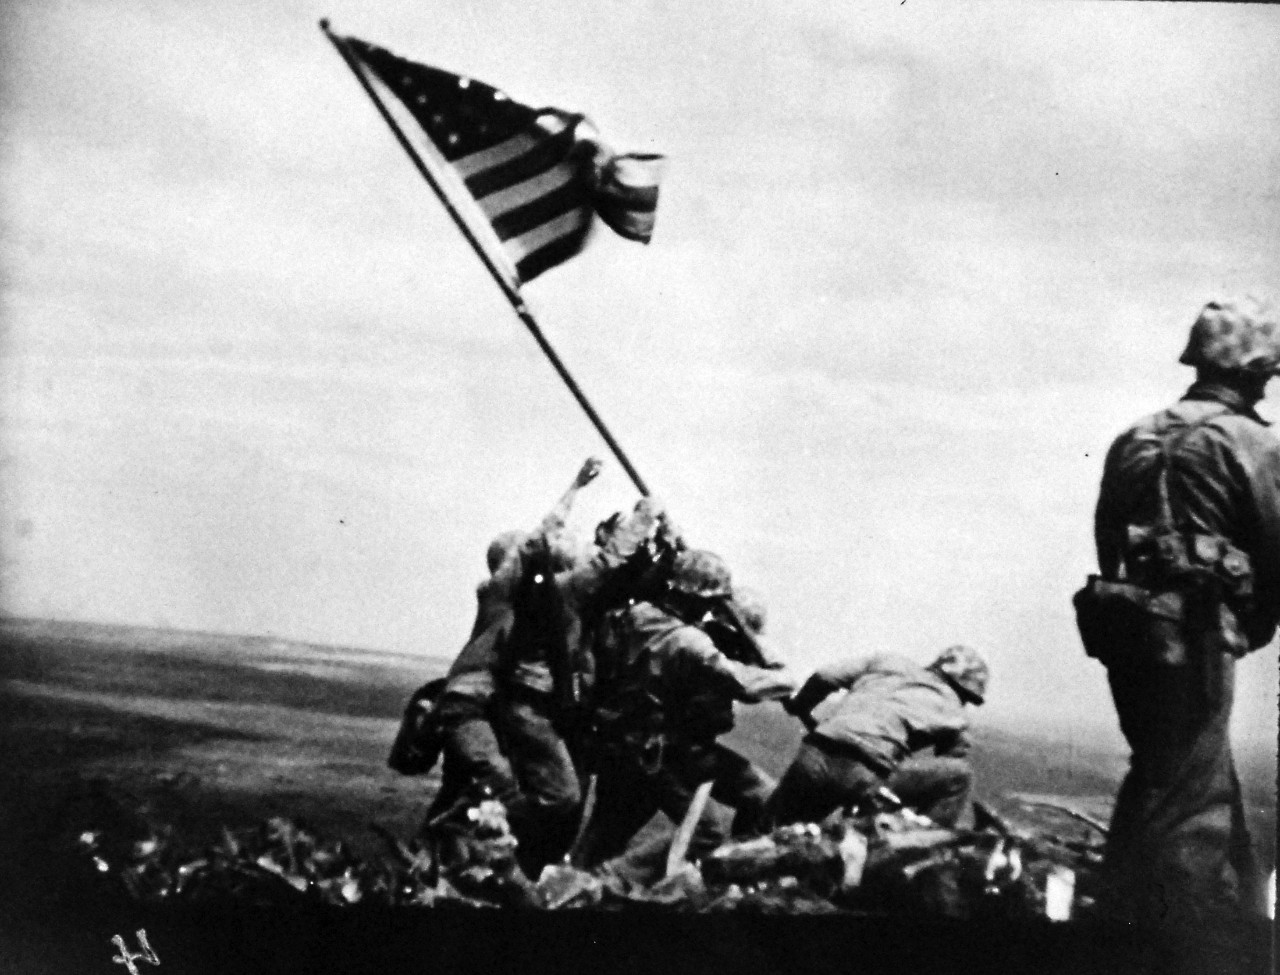 127-GW-319-116774: Iwo Jima Operations,  February 1945.  Over Suribachi.  A “still” taken from the 16mm movie series of the U.S. Marines raising the American flag on the summit of Mount Suribachi, Iwo Jima.     Photographed by Genaust, February 23, 1945.   Official U.S. Marine Corps Photograph, now in the collections of the National Archives.  (2016/09/06).